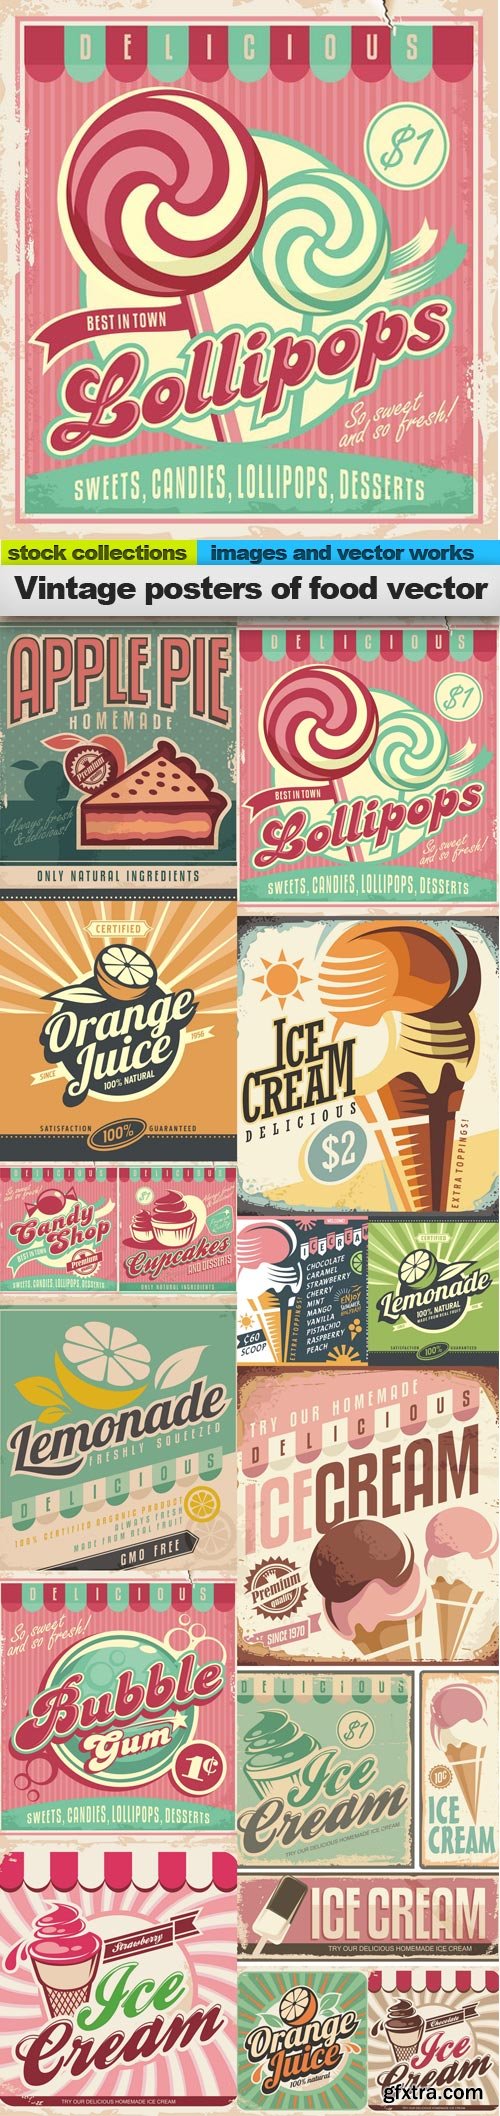 Vintage posters of food vector, 15 x EPS